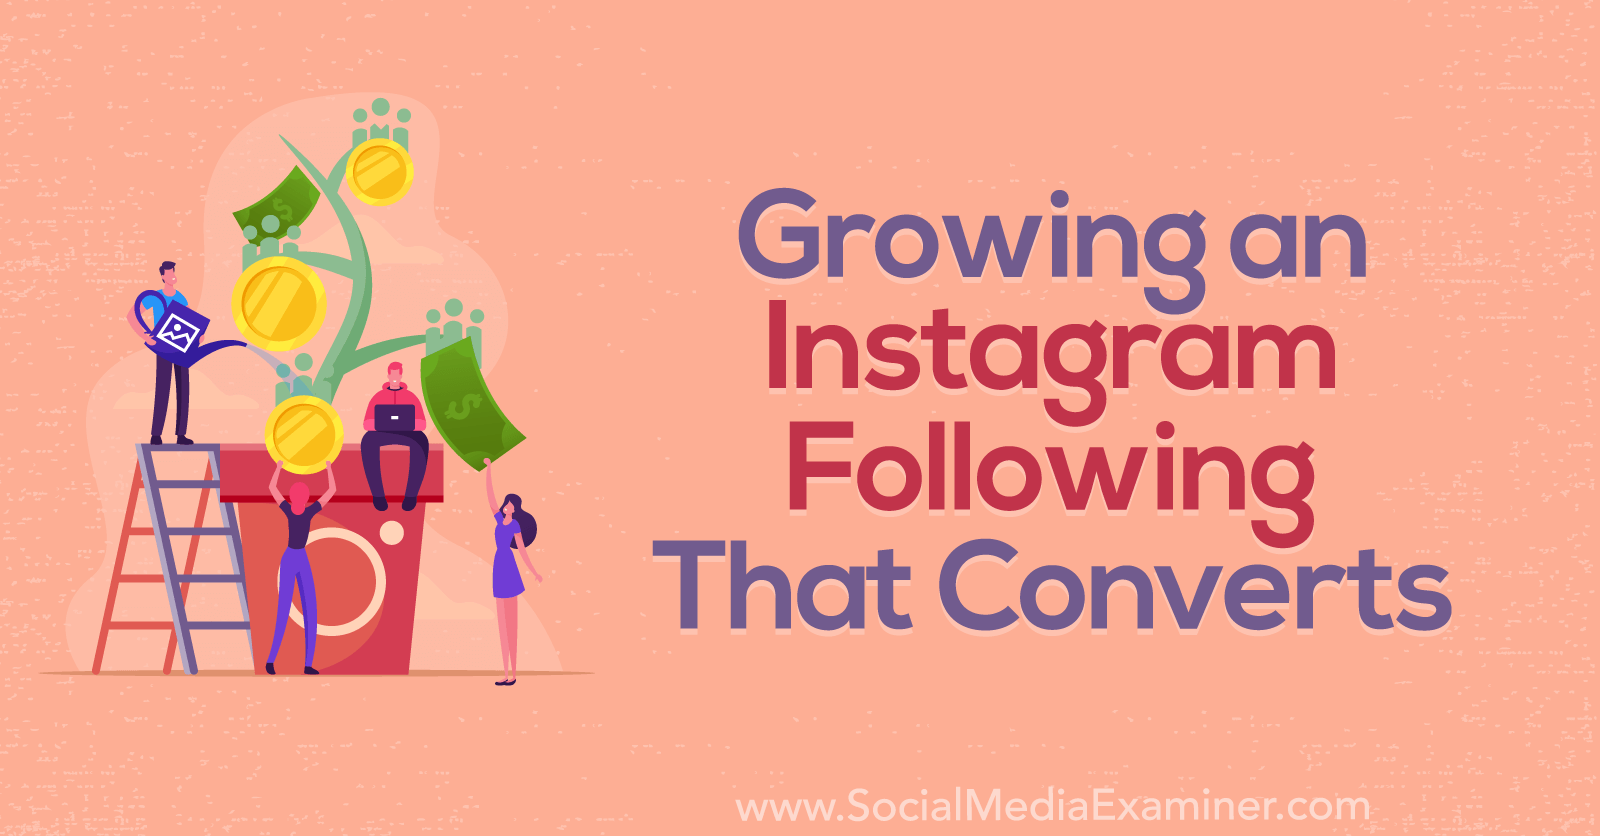 Growing an Instagram Following That Converts featuring insights from Josh Ryan on the Social Media Marketing Podcast.